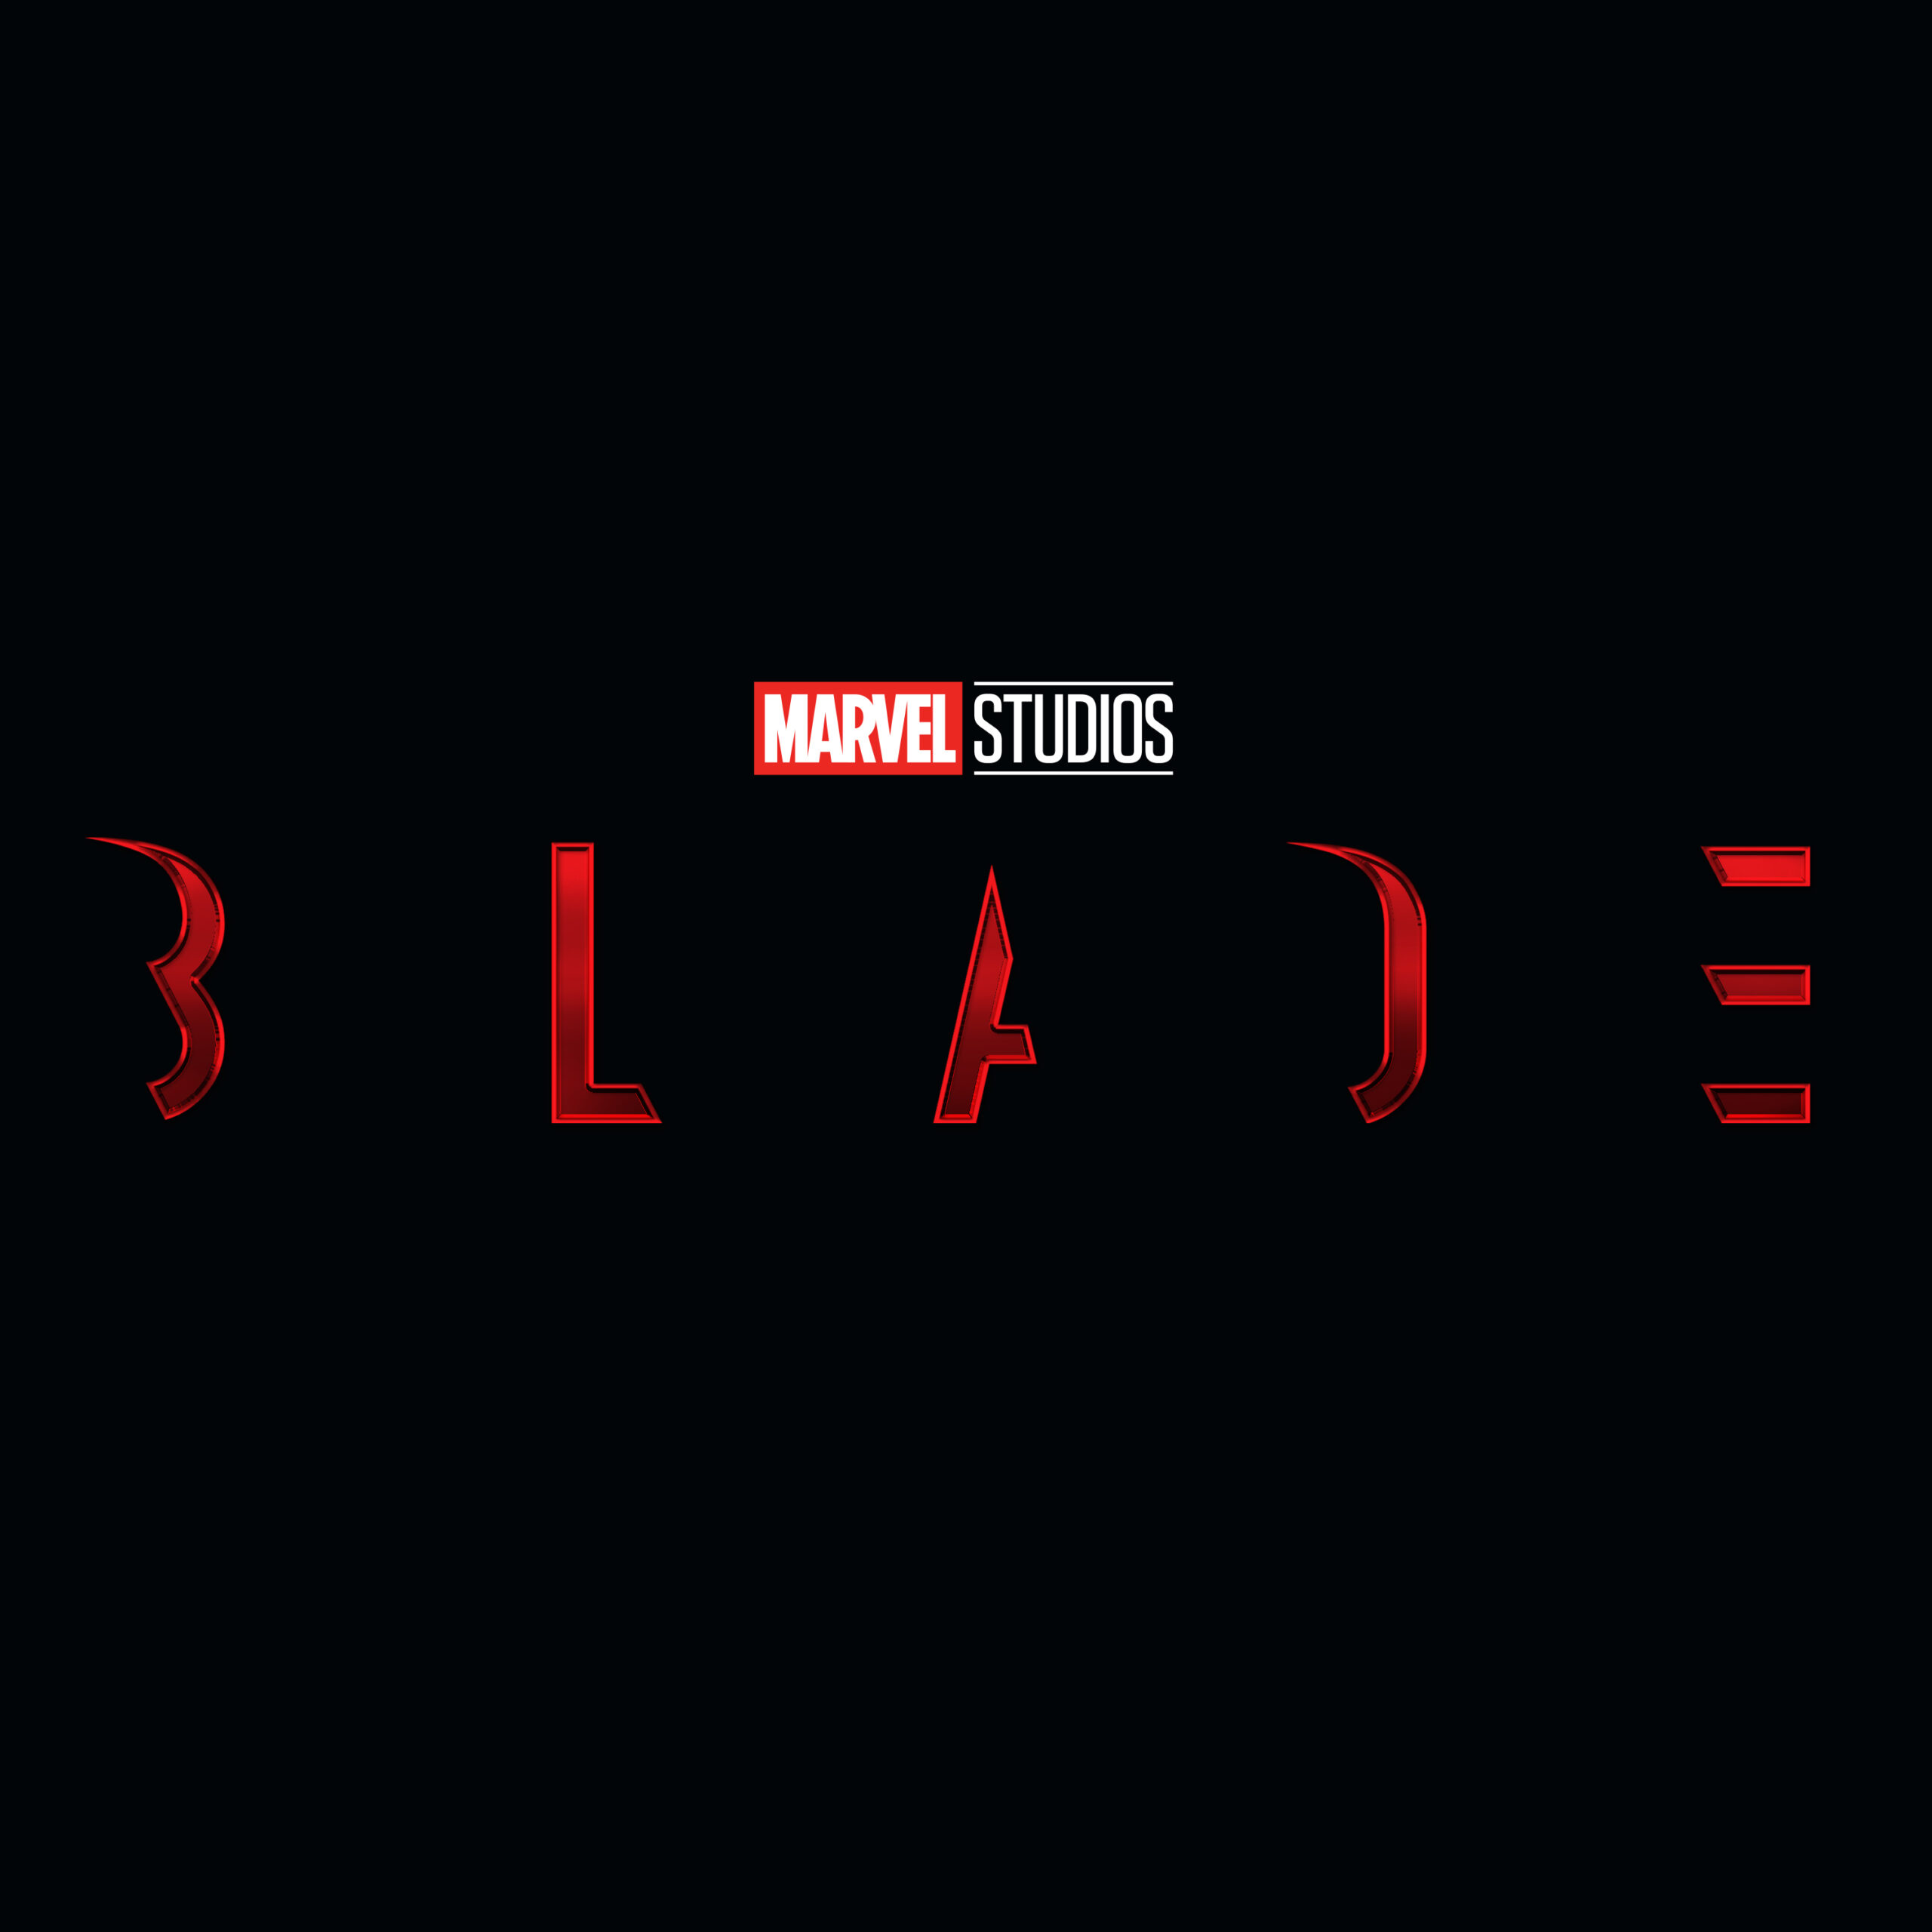 According to a new report, the Blade director search may nearing an end as Marvel closes in on a replacement in Elegance Bratton.